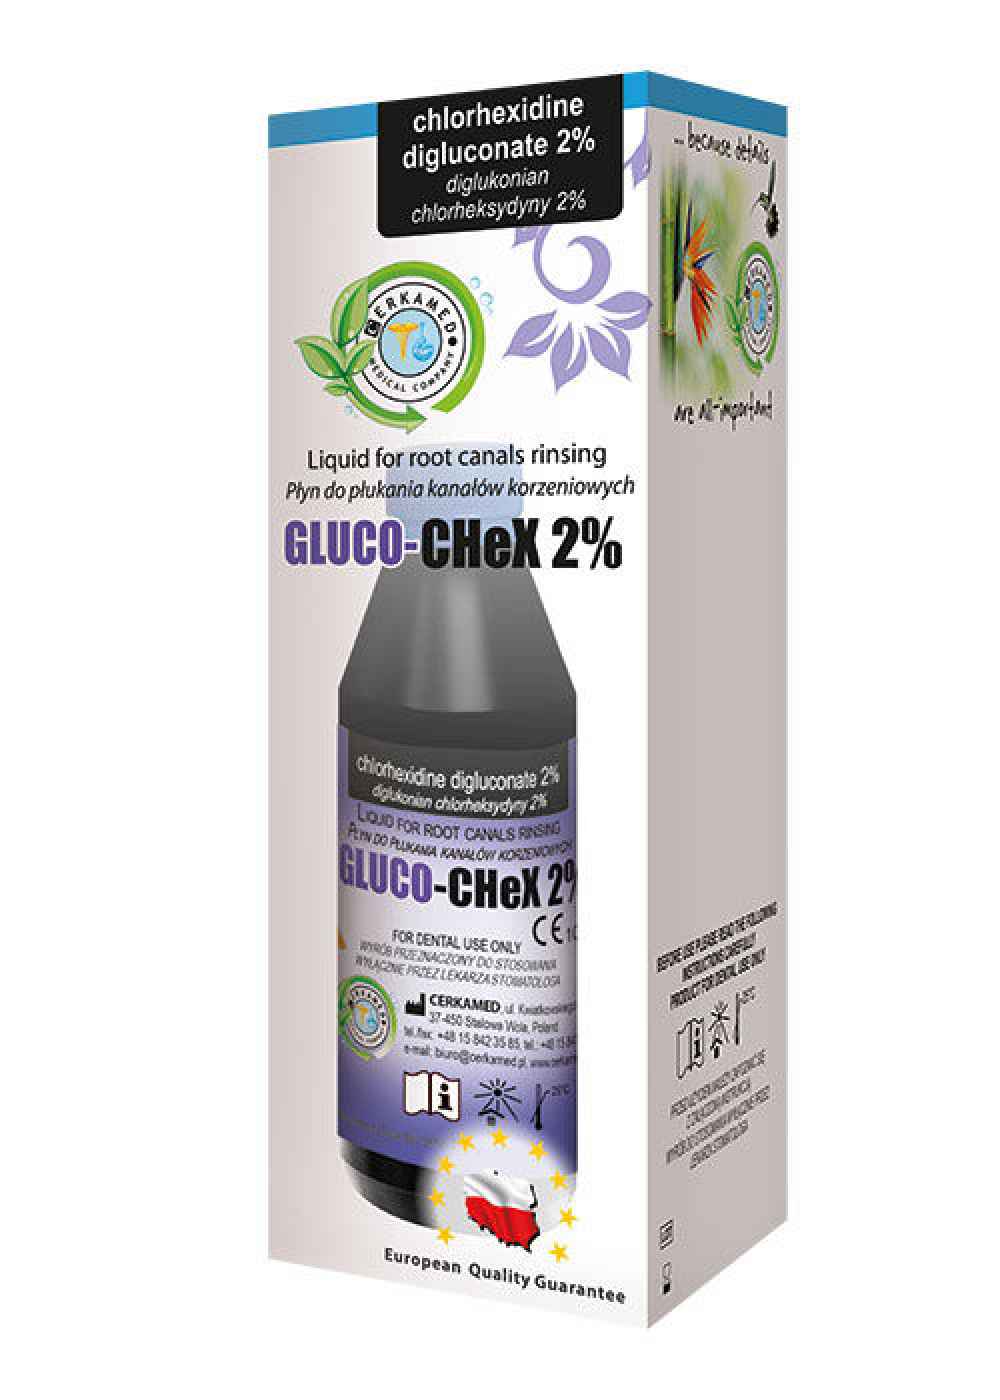 Cerkamed Gluco Chex-2 200-ML Liquid for root canal rinsing